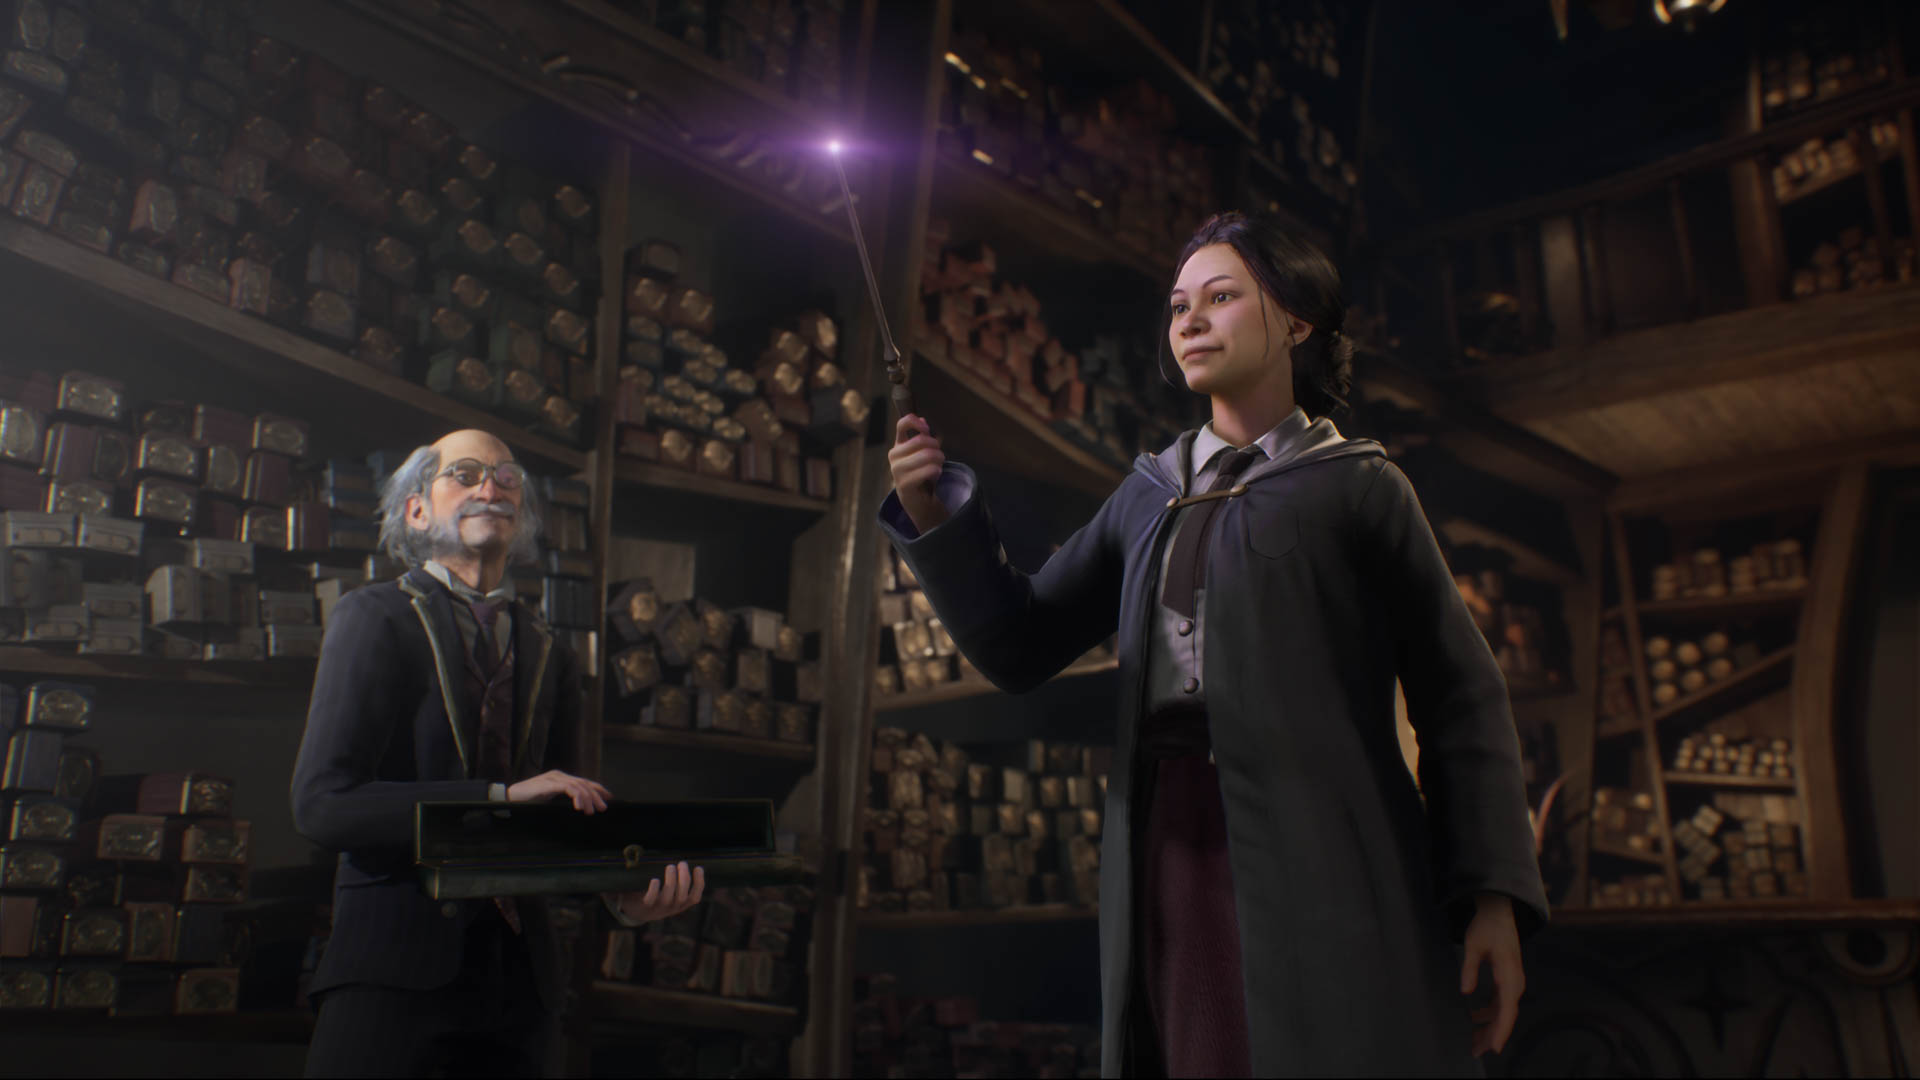 Hogwarts Legacy State of Play showcases gameplay and teases the story